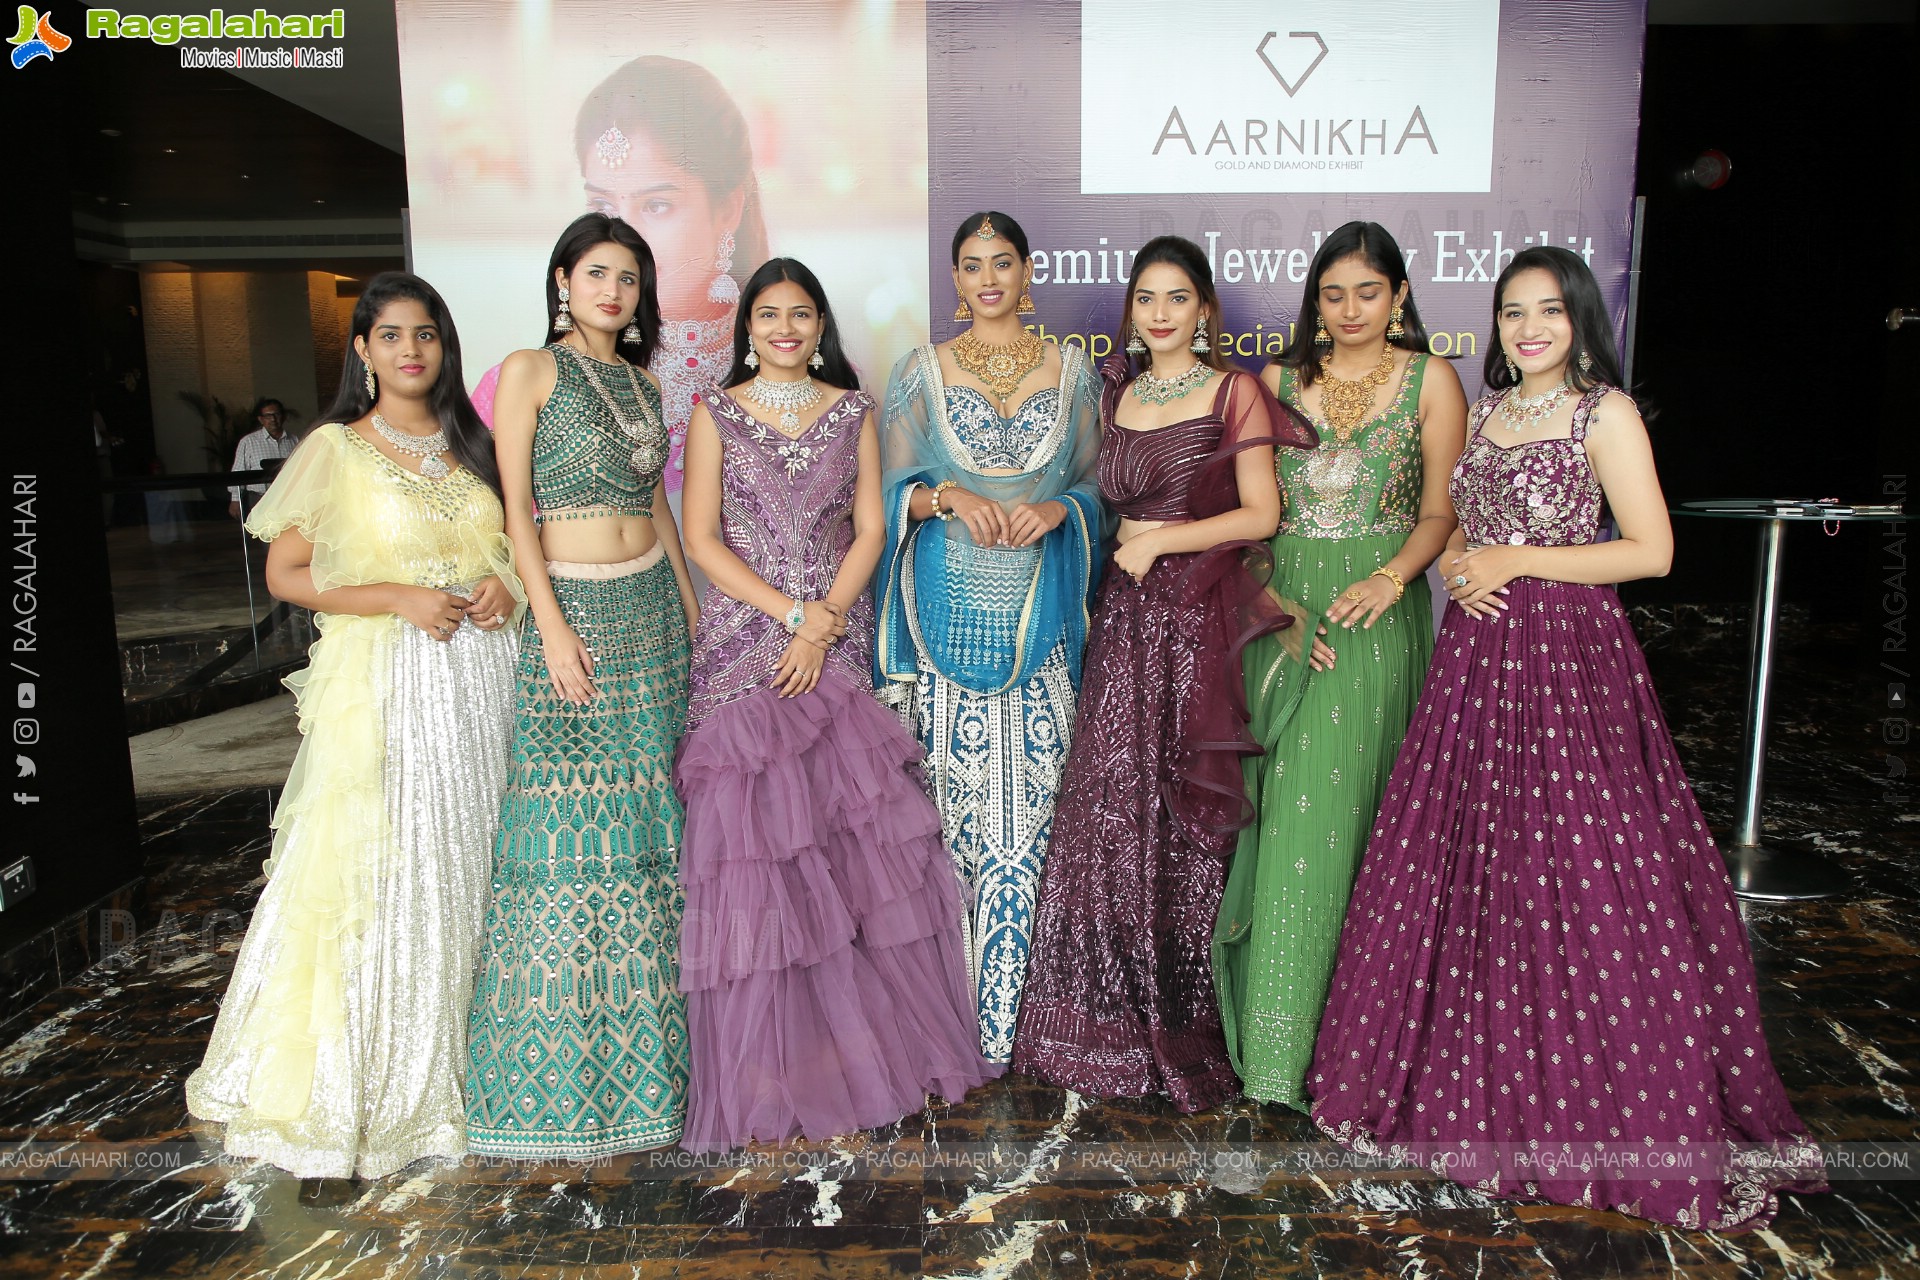 Aarnikha Gold and Diamond Exhibit Initiating Countdown and Fashion Show